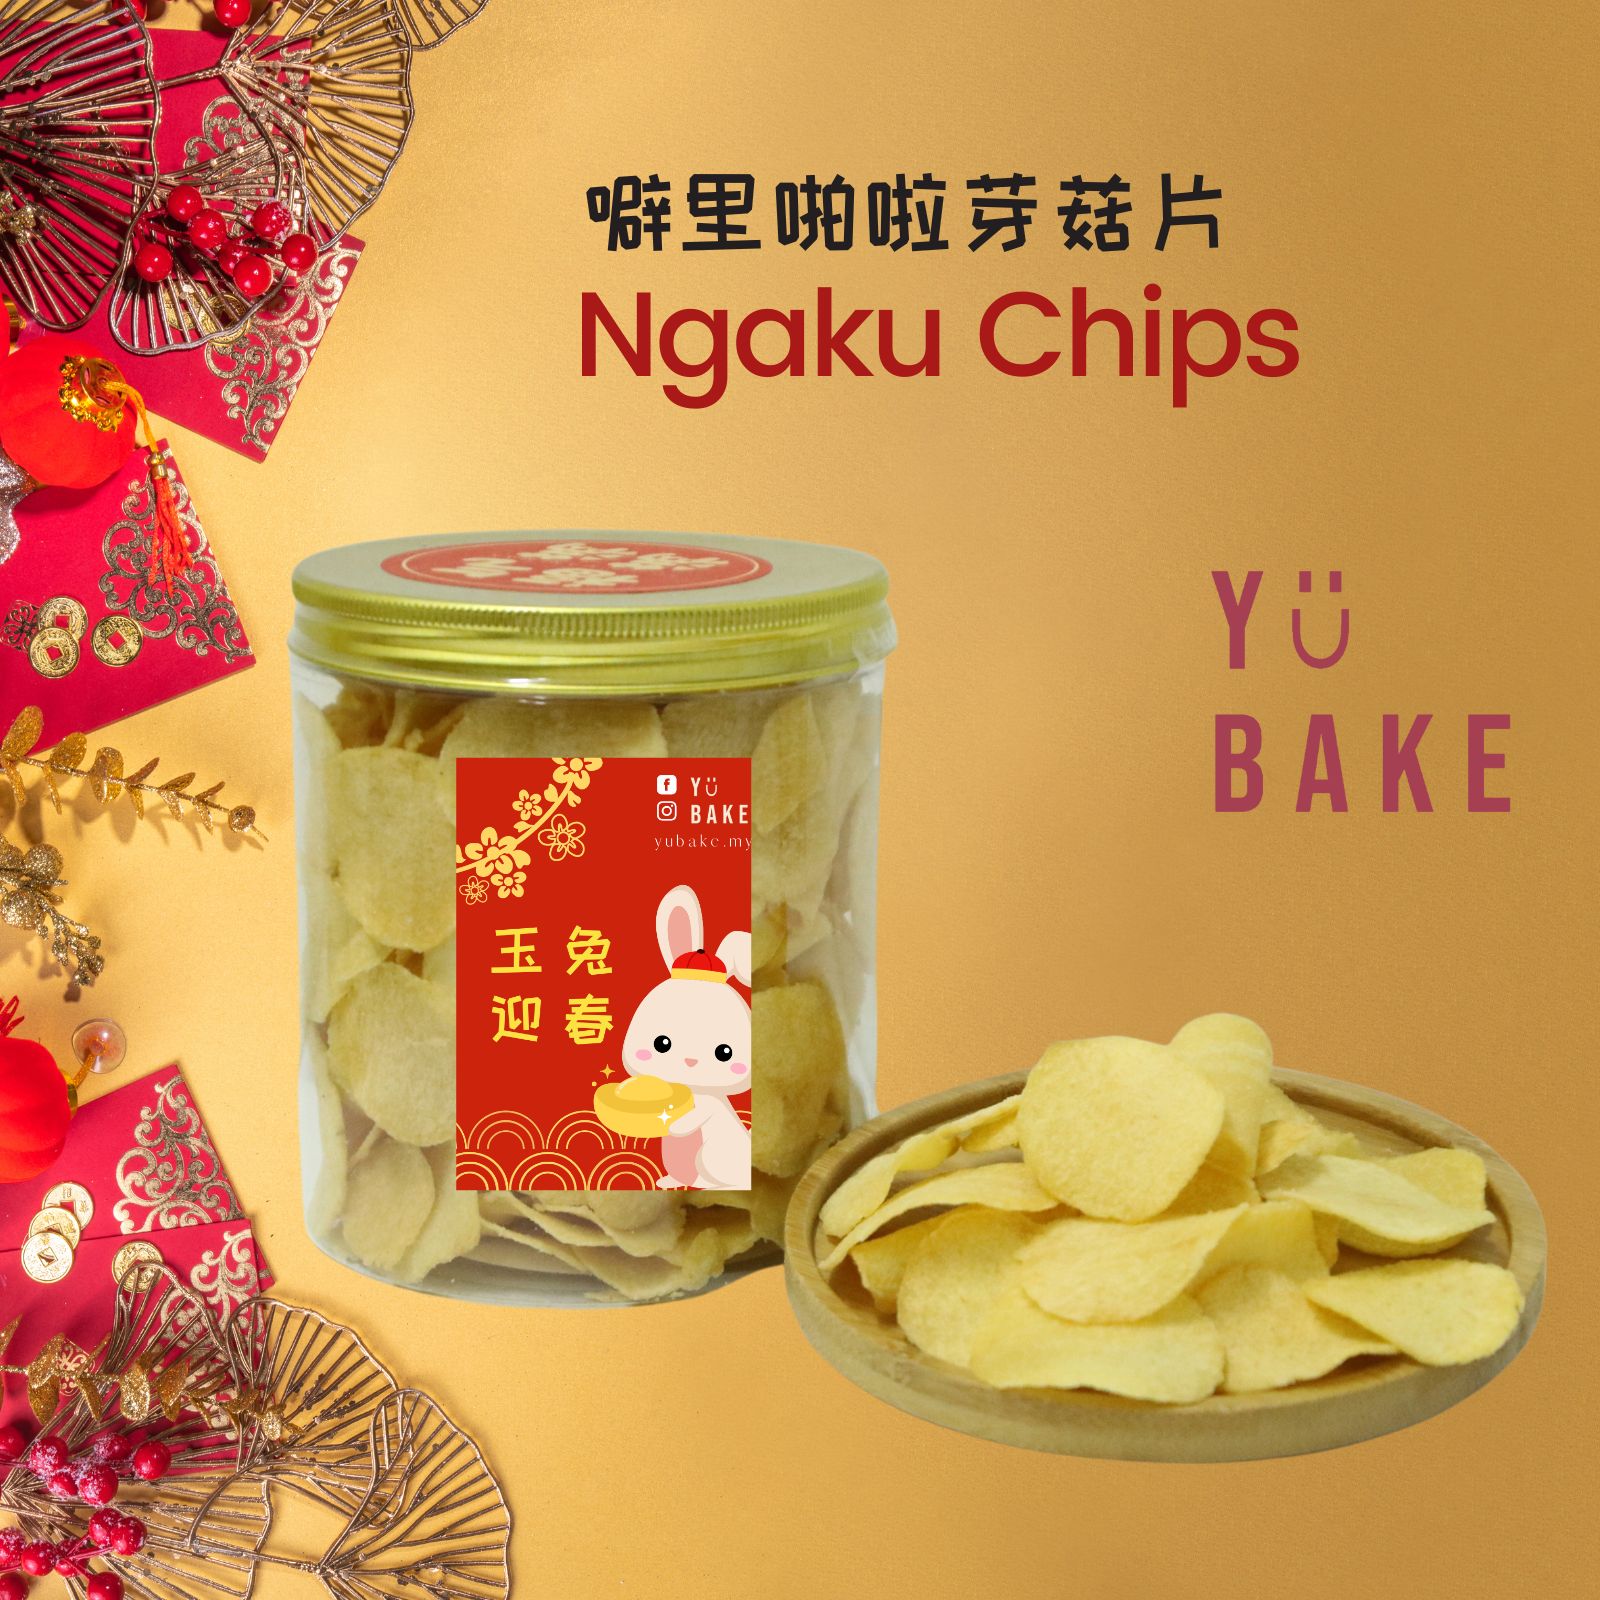 ngaku-chips-cny-cookies-delivery-in-kl-yubake